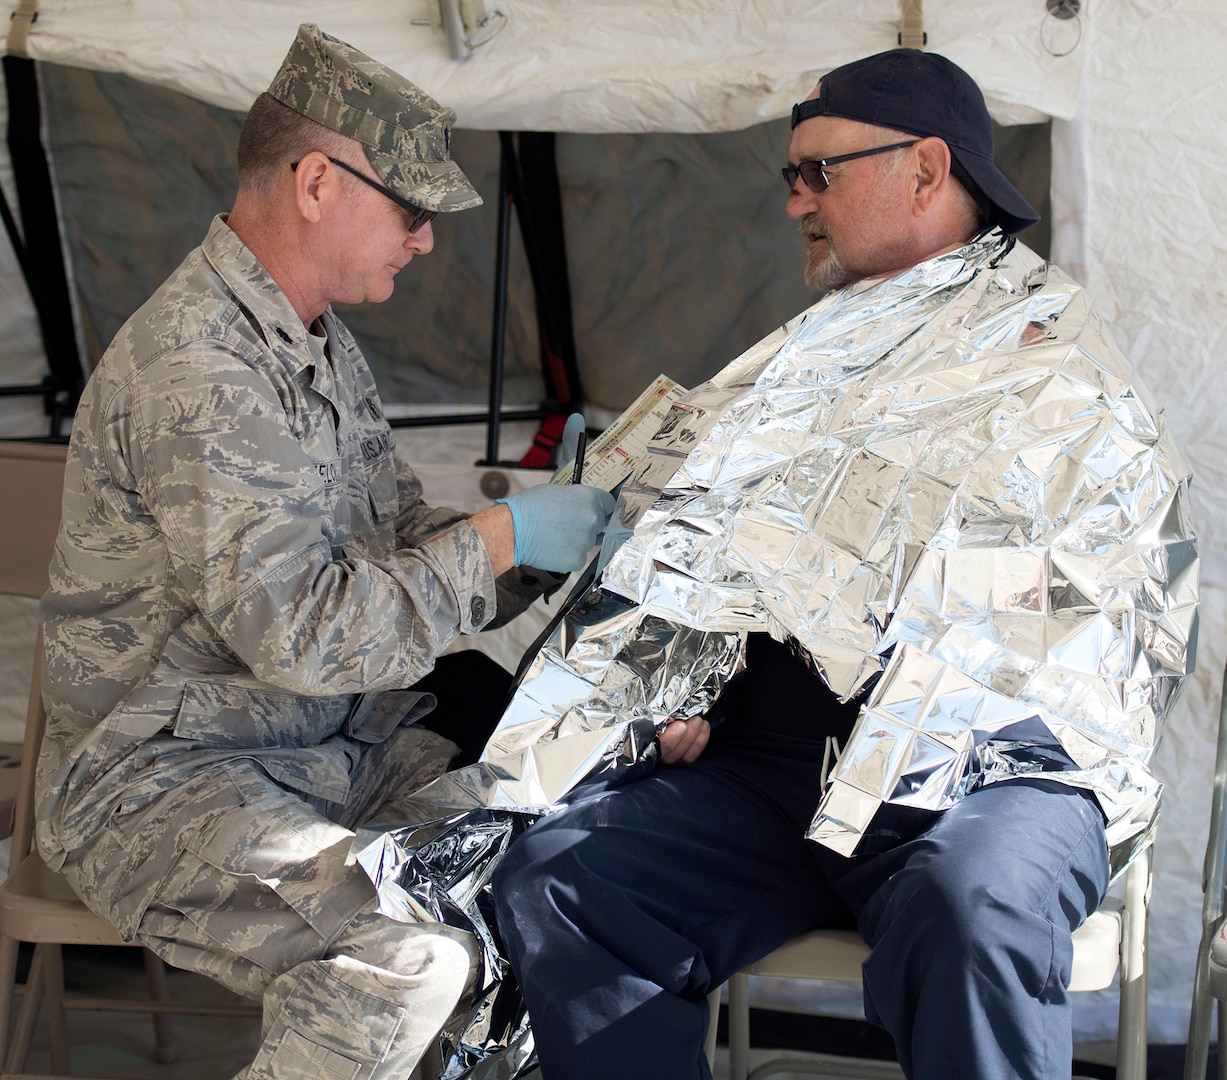 Lt. Col. Todd Welch, a physicians assistant, assigned tothe 149th Medical Group’s Det. 1, simulates providing medical treatment to a role player during the Texas National Guard's 6th CERFP Task Force, which includes the 149th Fatality Search and Recovery Team, participated in a response evaluation exercise Dec. 7, 2019, in Round Rock, Texas.